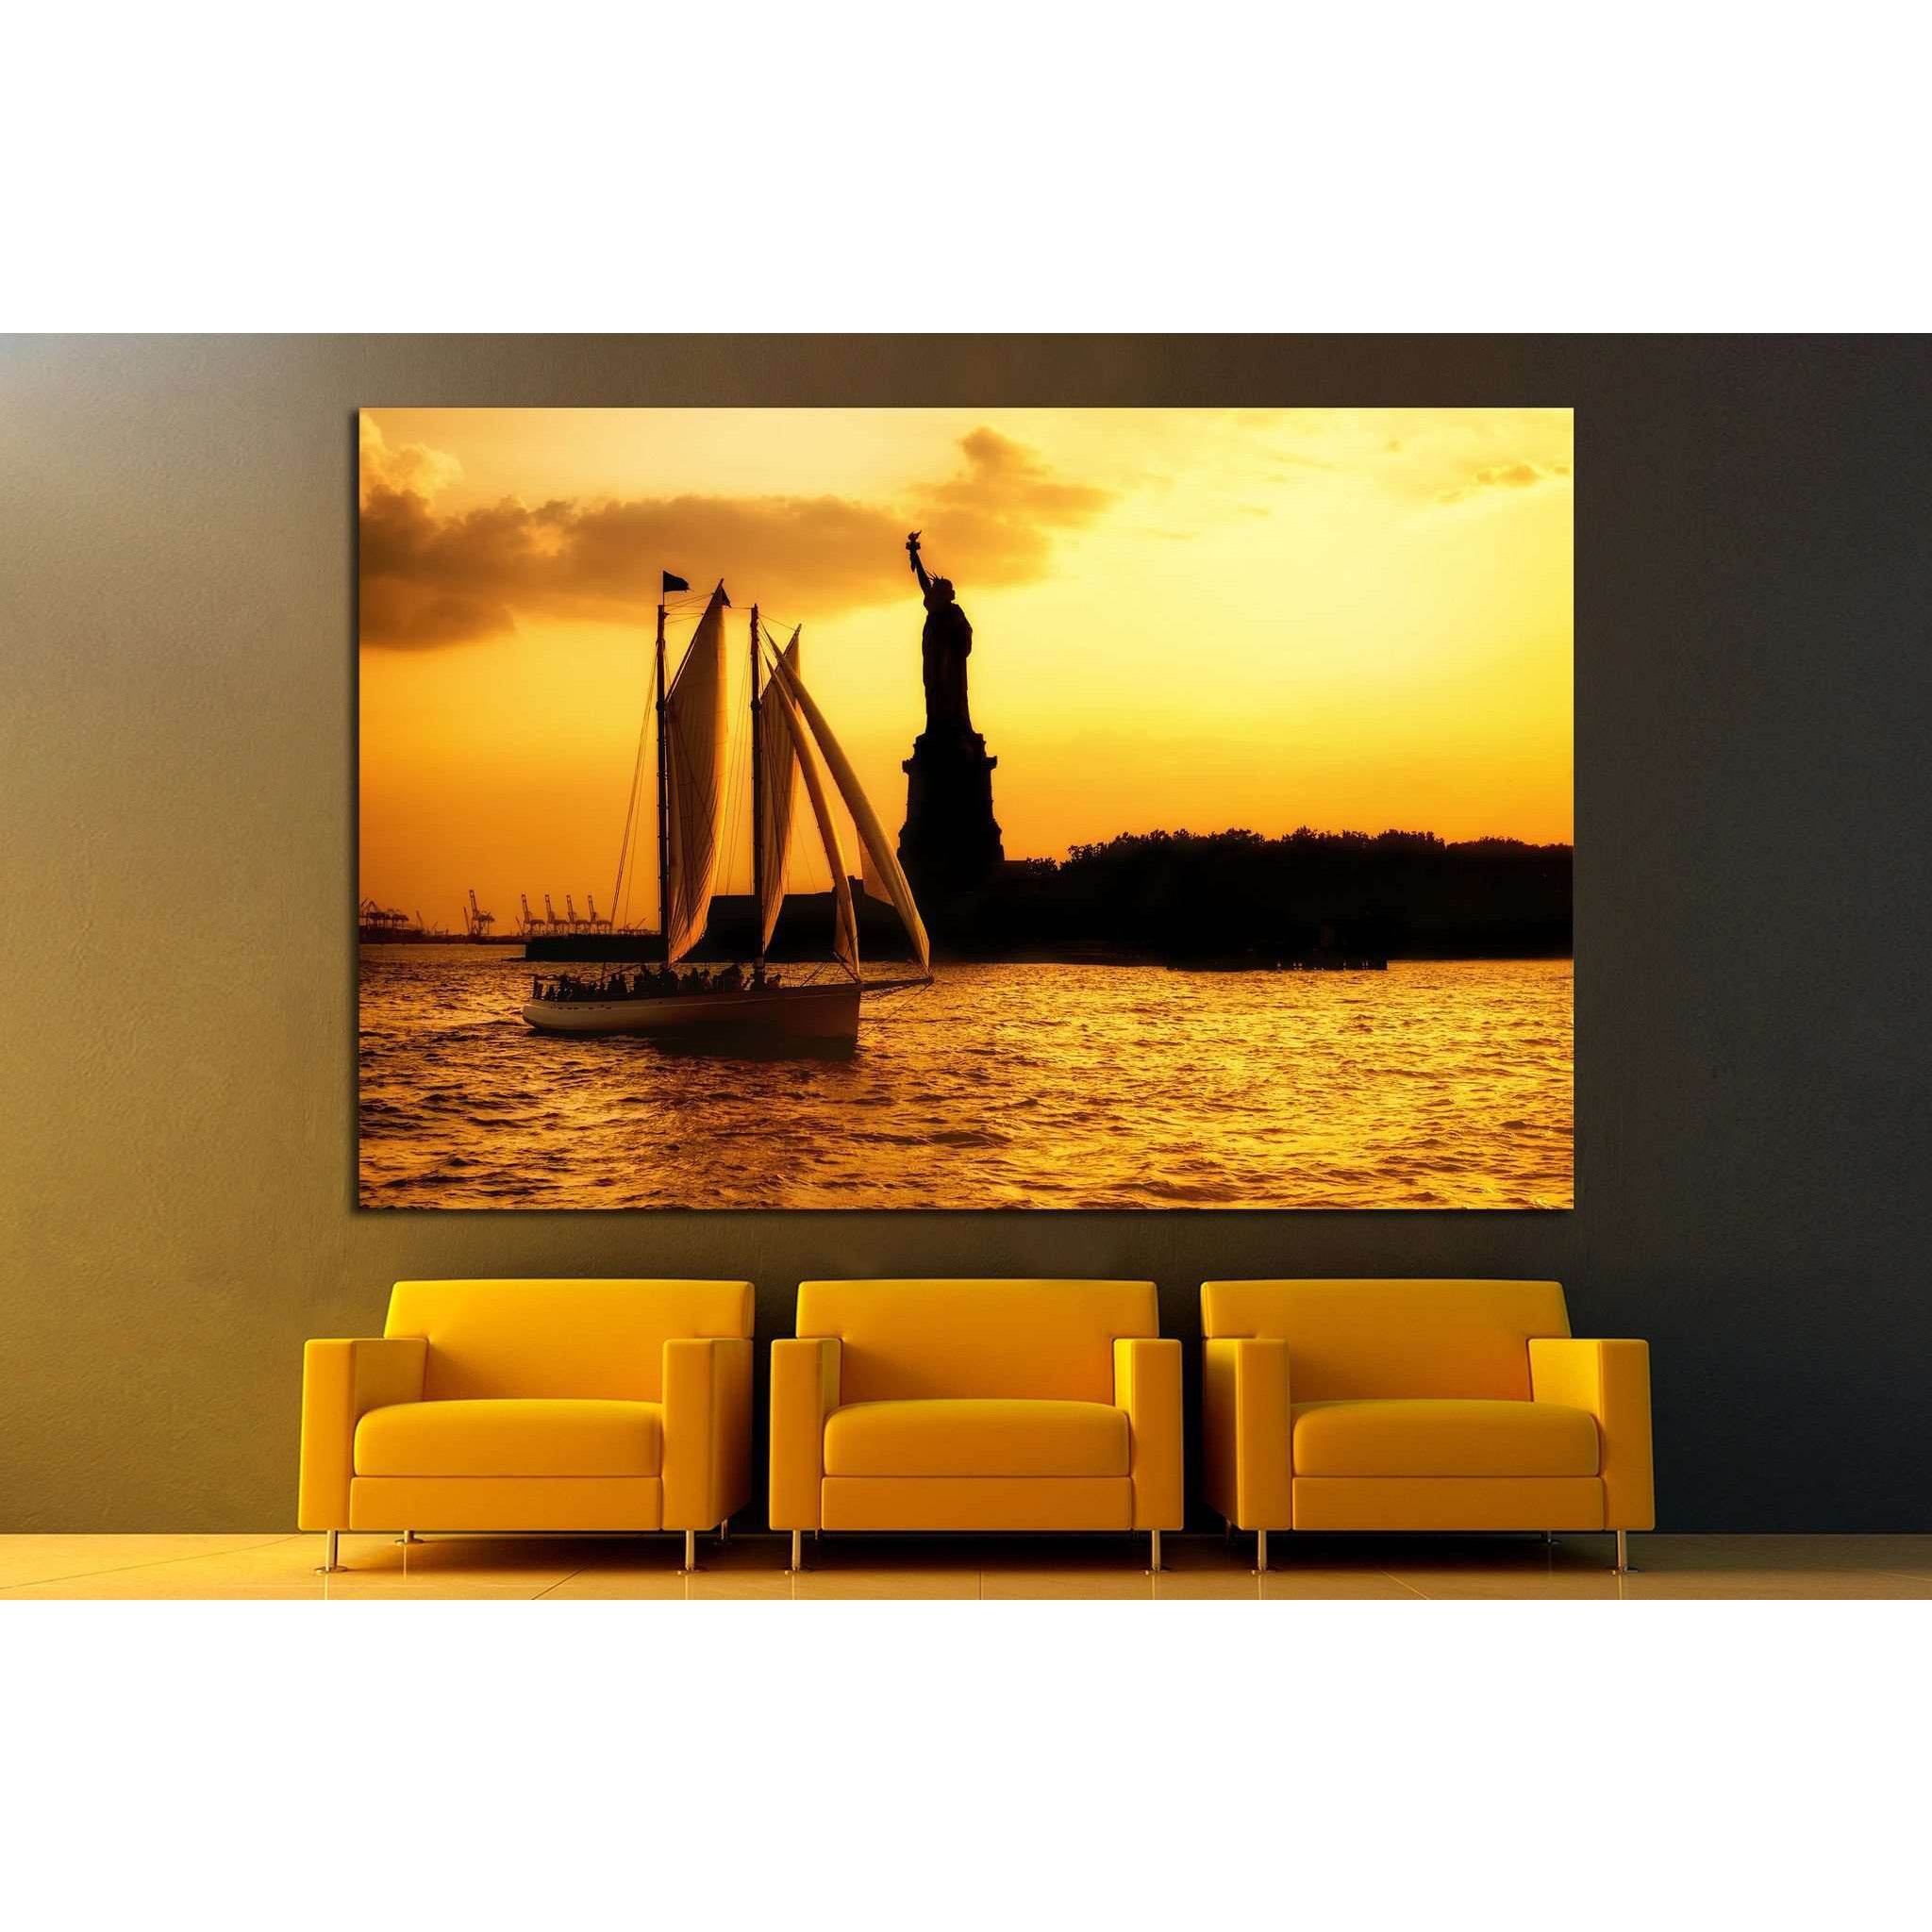 Statue of Liberty and a sailboat №1291 Ready to Hang Canvas Print